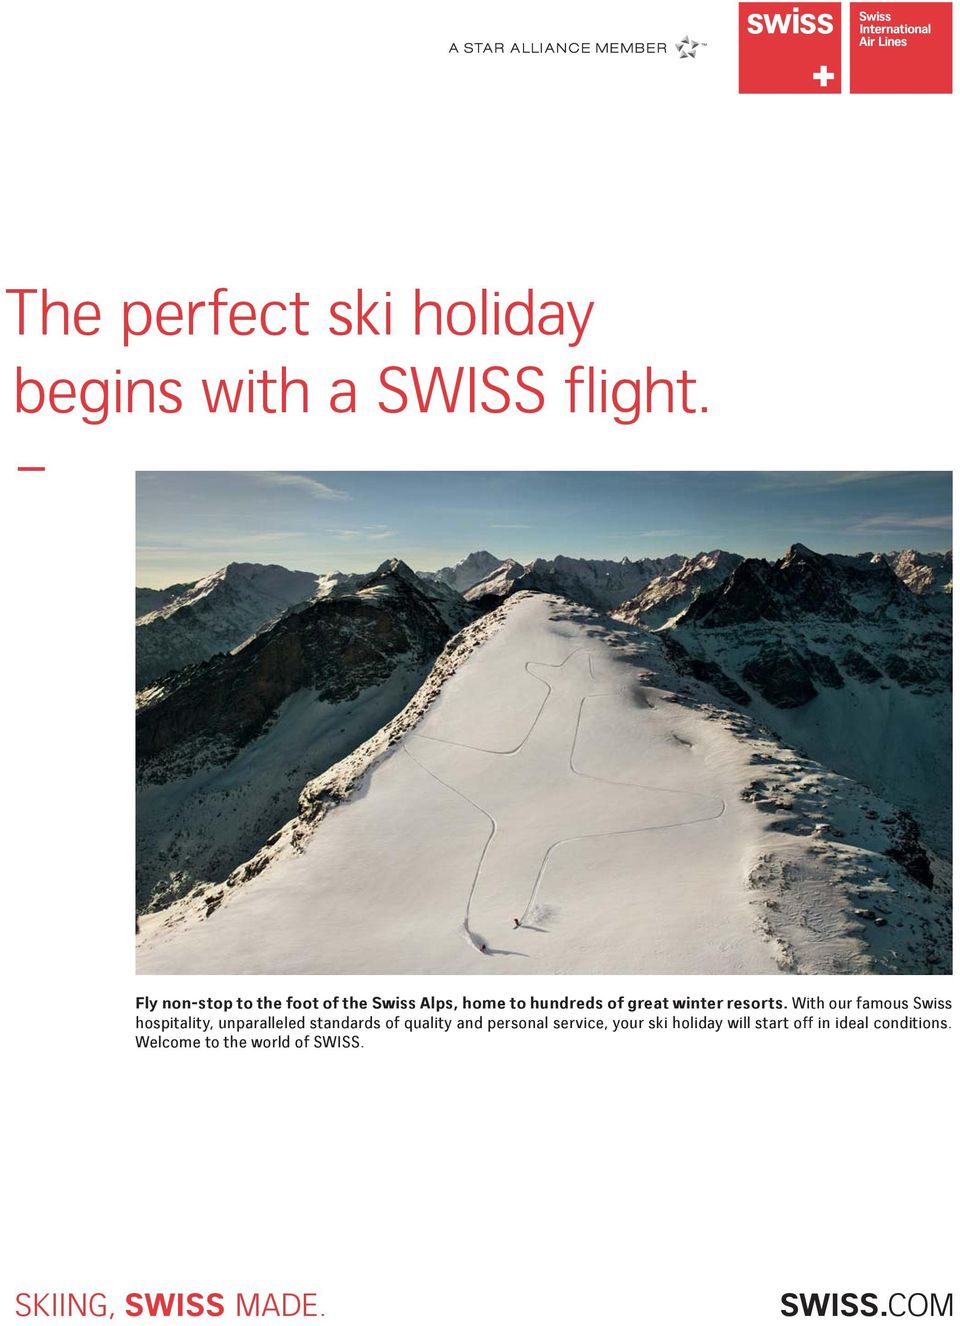 With our famous Swiss hospitality, unparalleled standards of quality and personal